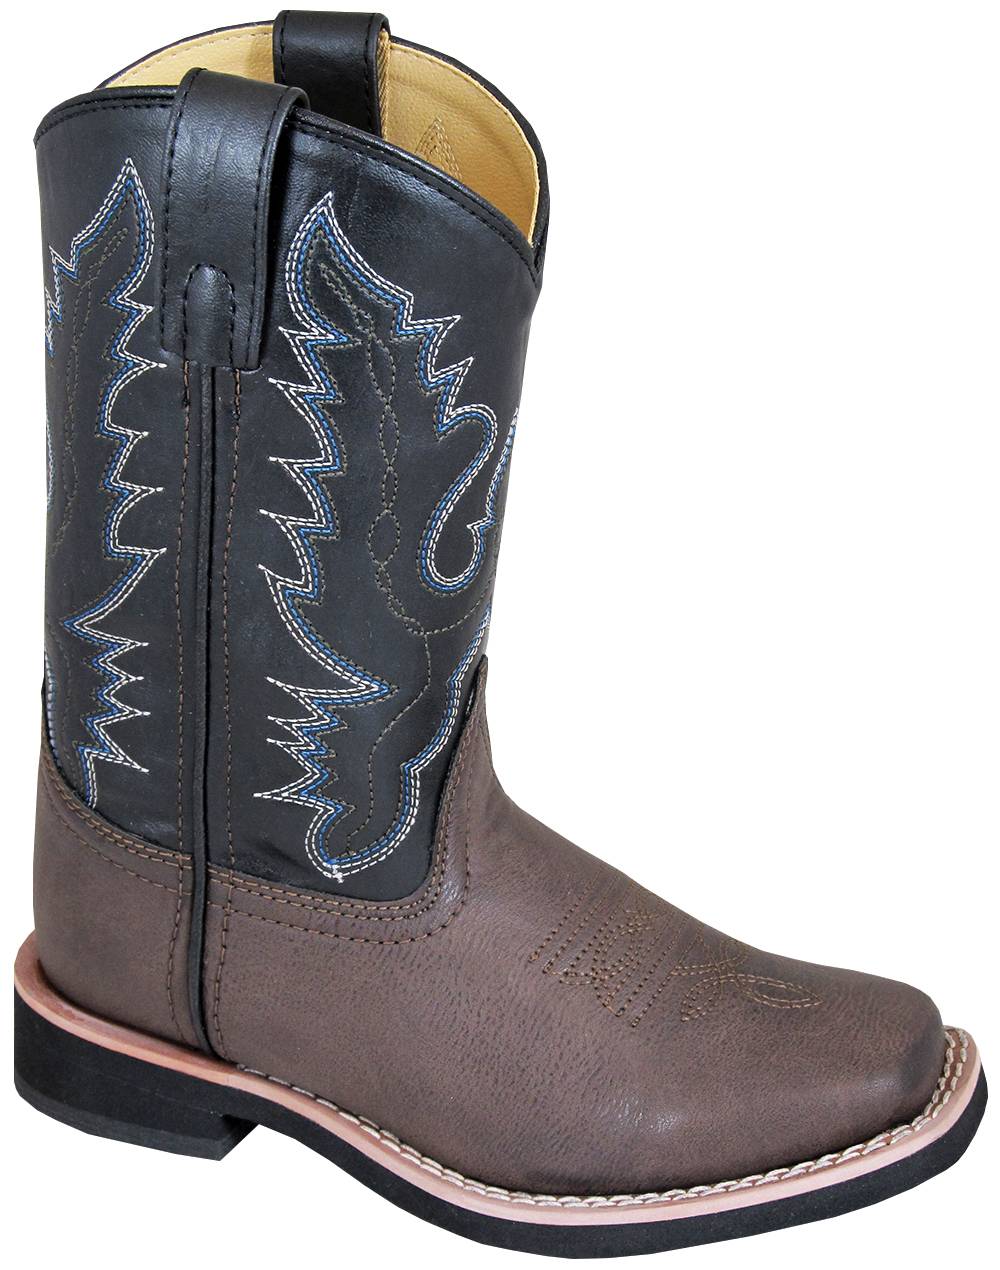 Smoky Mountain Childrens Tyler Boots Brown/Black